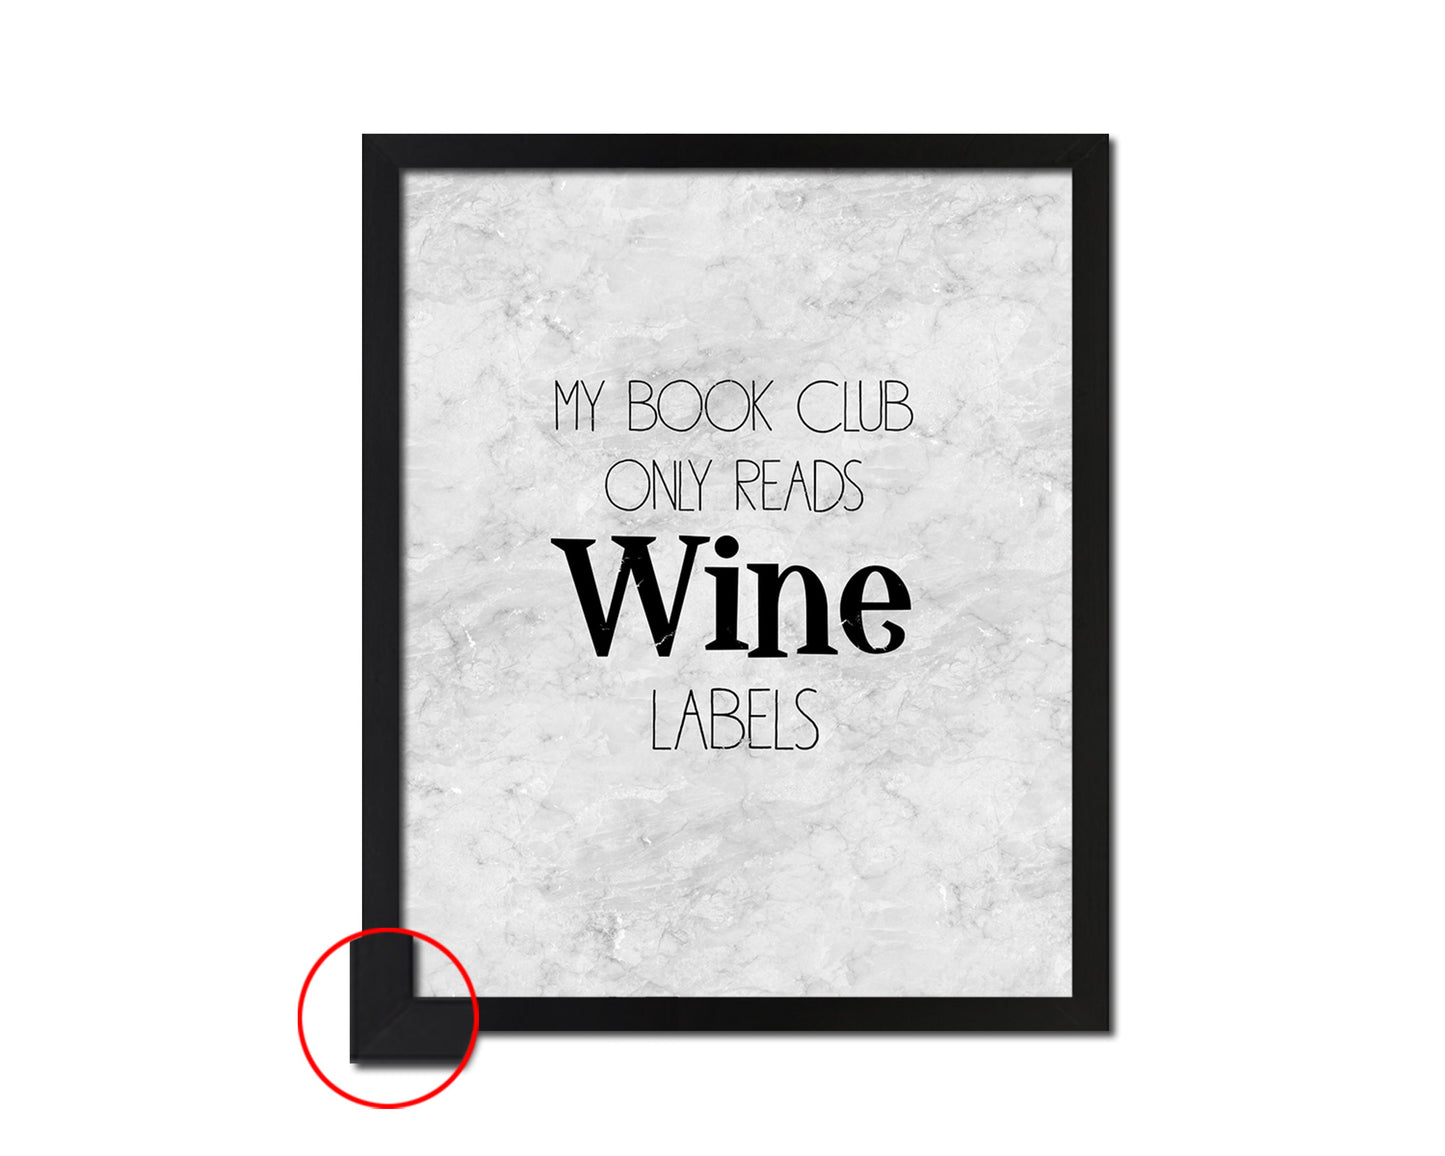 My book club only reads wine labels Quote Framed Print Wall Art Decor Gifts